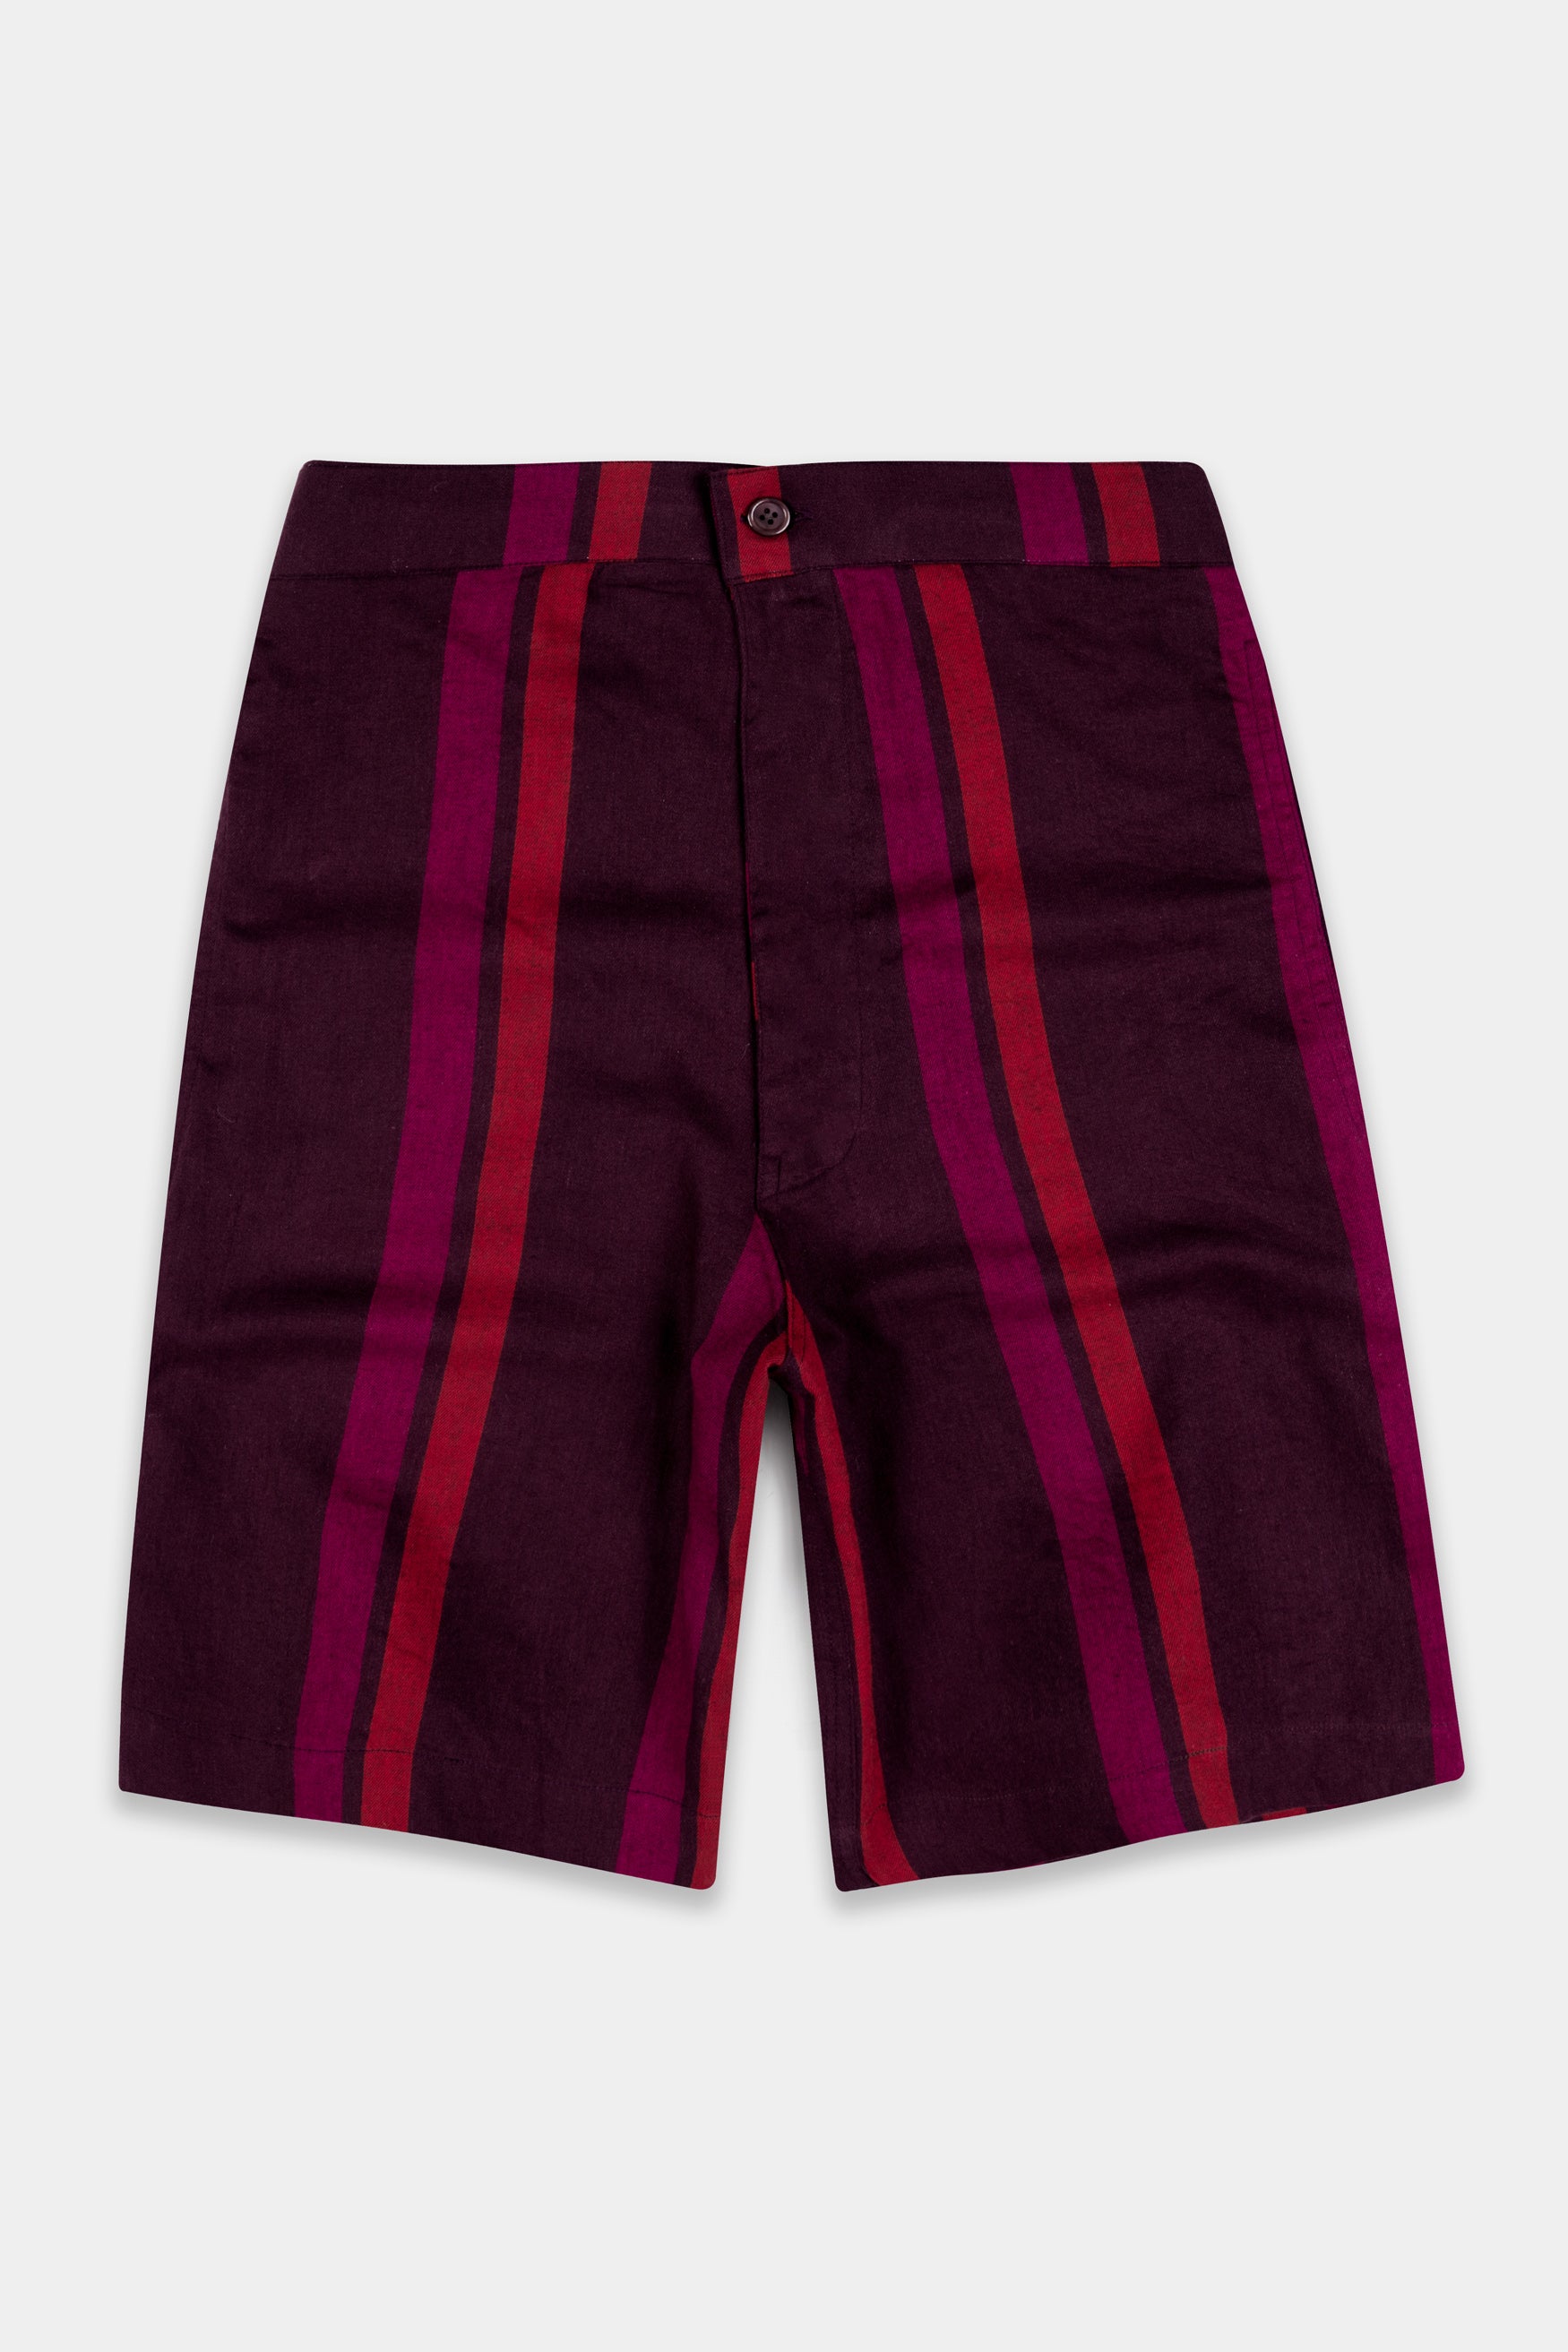 Aubergine Maroon and Paprika Red Striped Twill Premium Cotton Shorts SR398-28, SR398-30, SR398-32, SR398-34, SR398-36, SR398-38, SR398-40, SR398-42, SR398-44